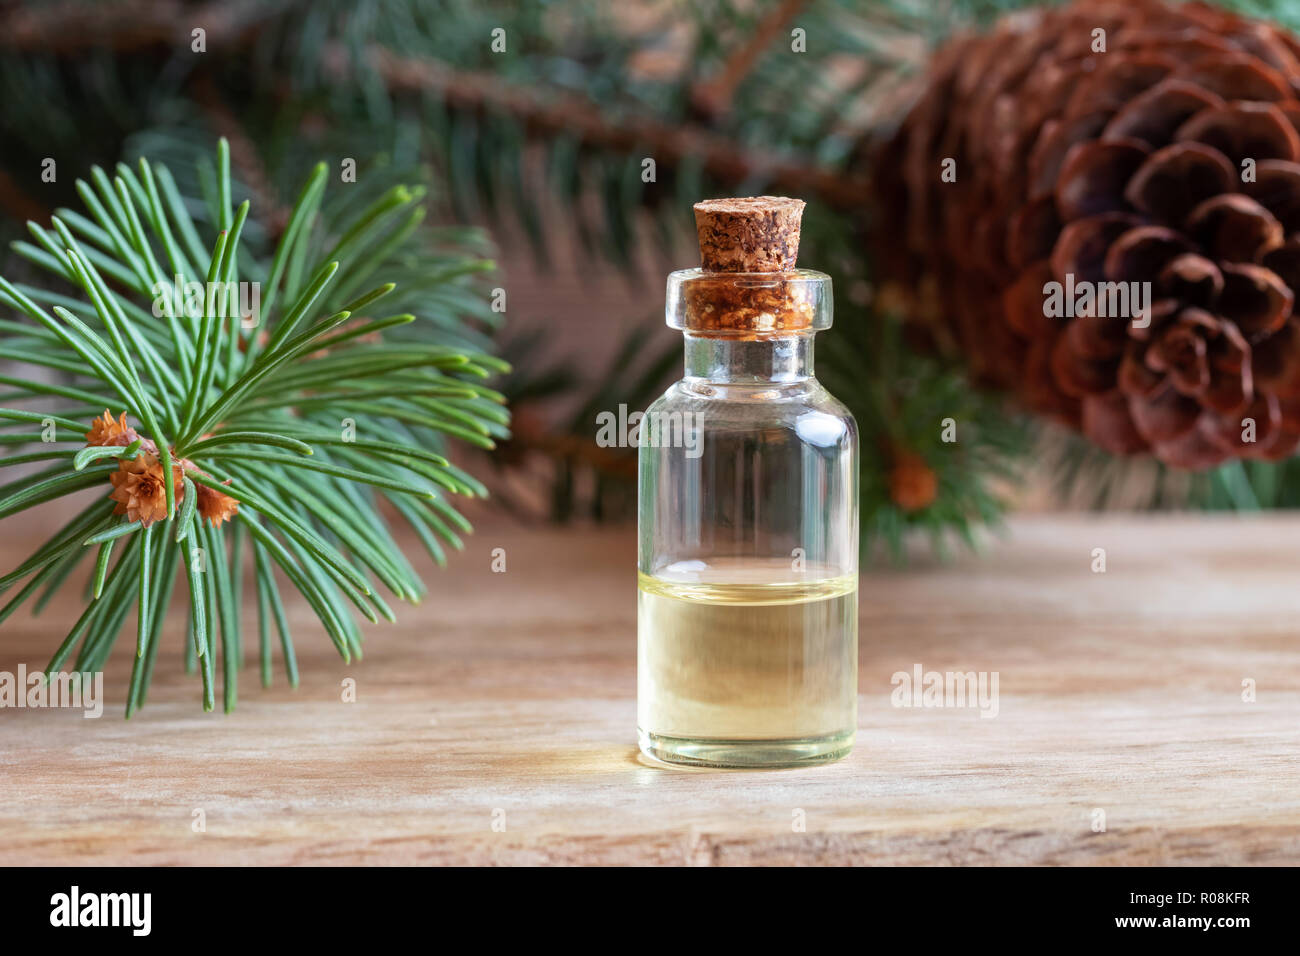 A bottle of essential oil with spruce branches and cones Stock Photo